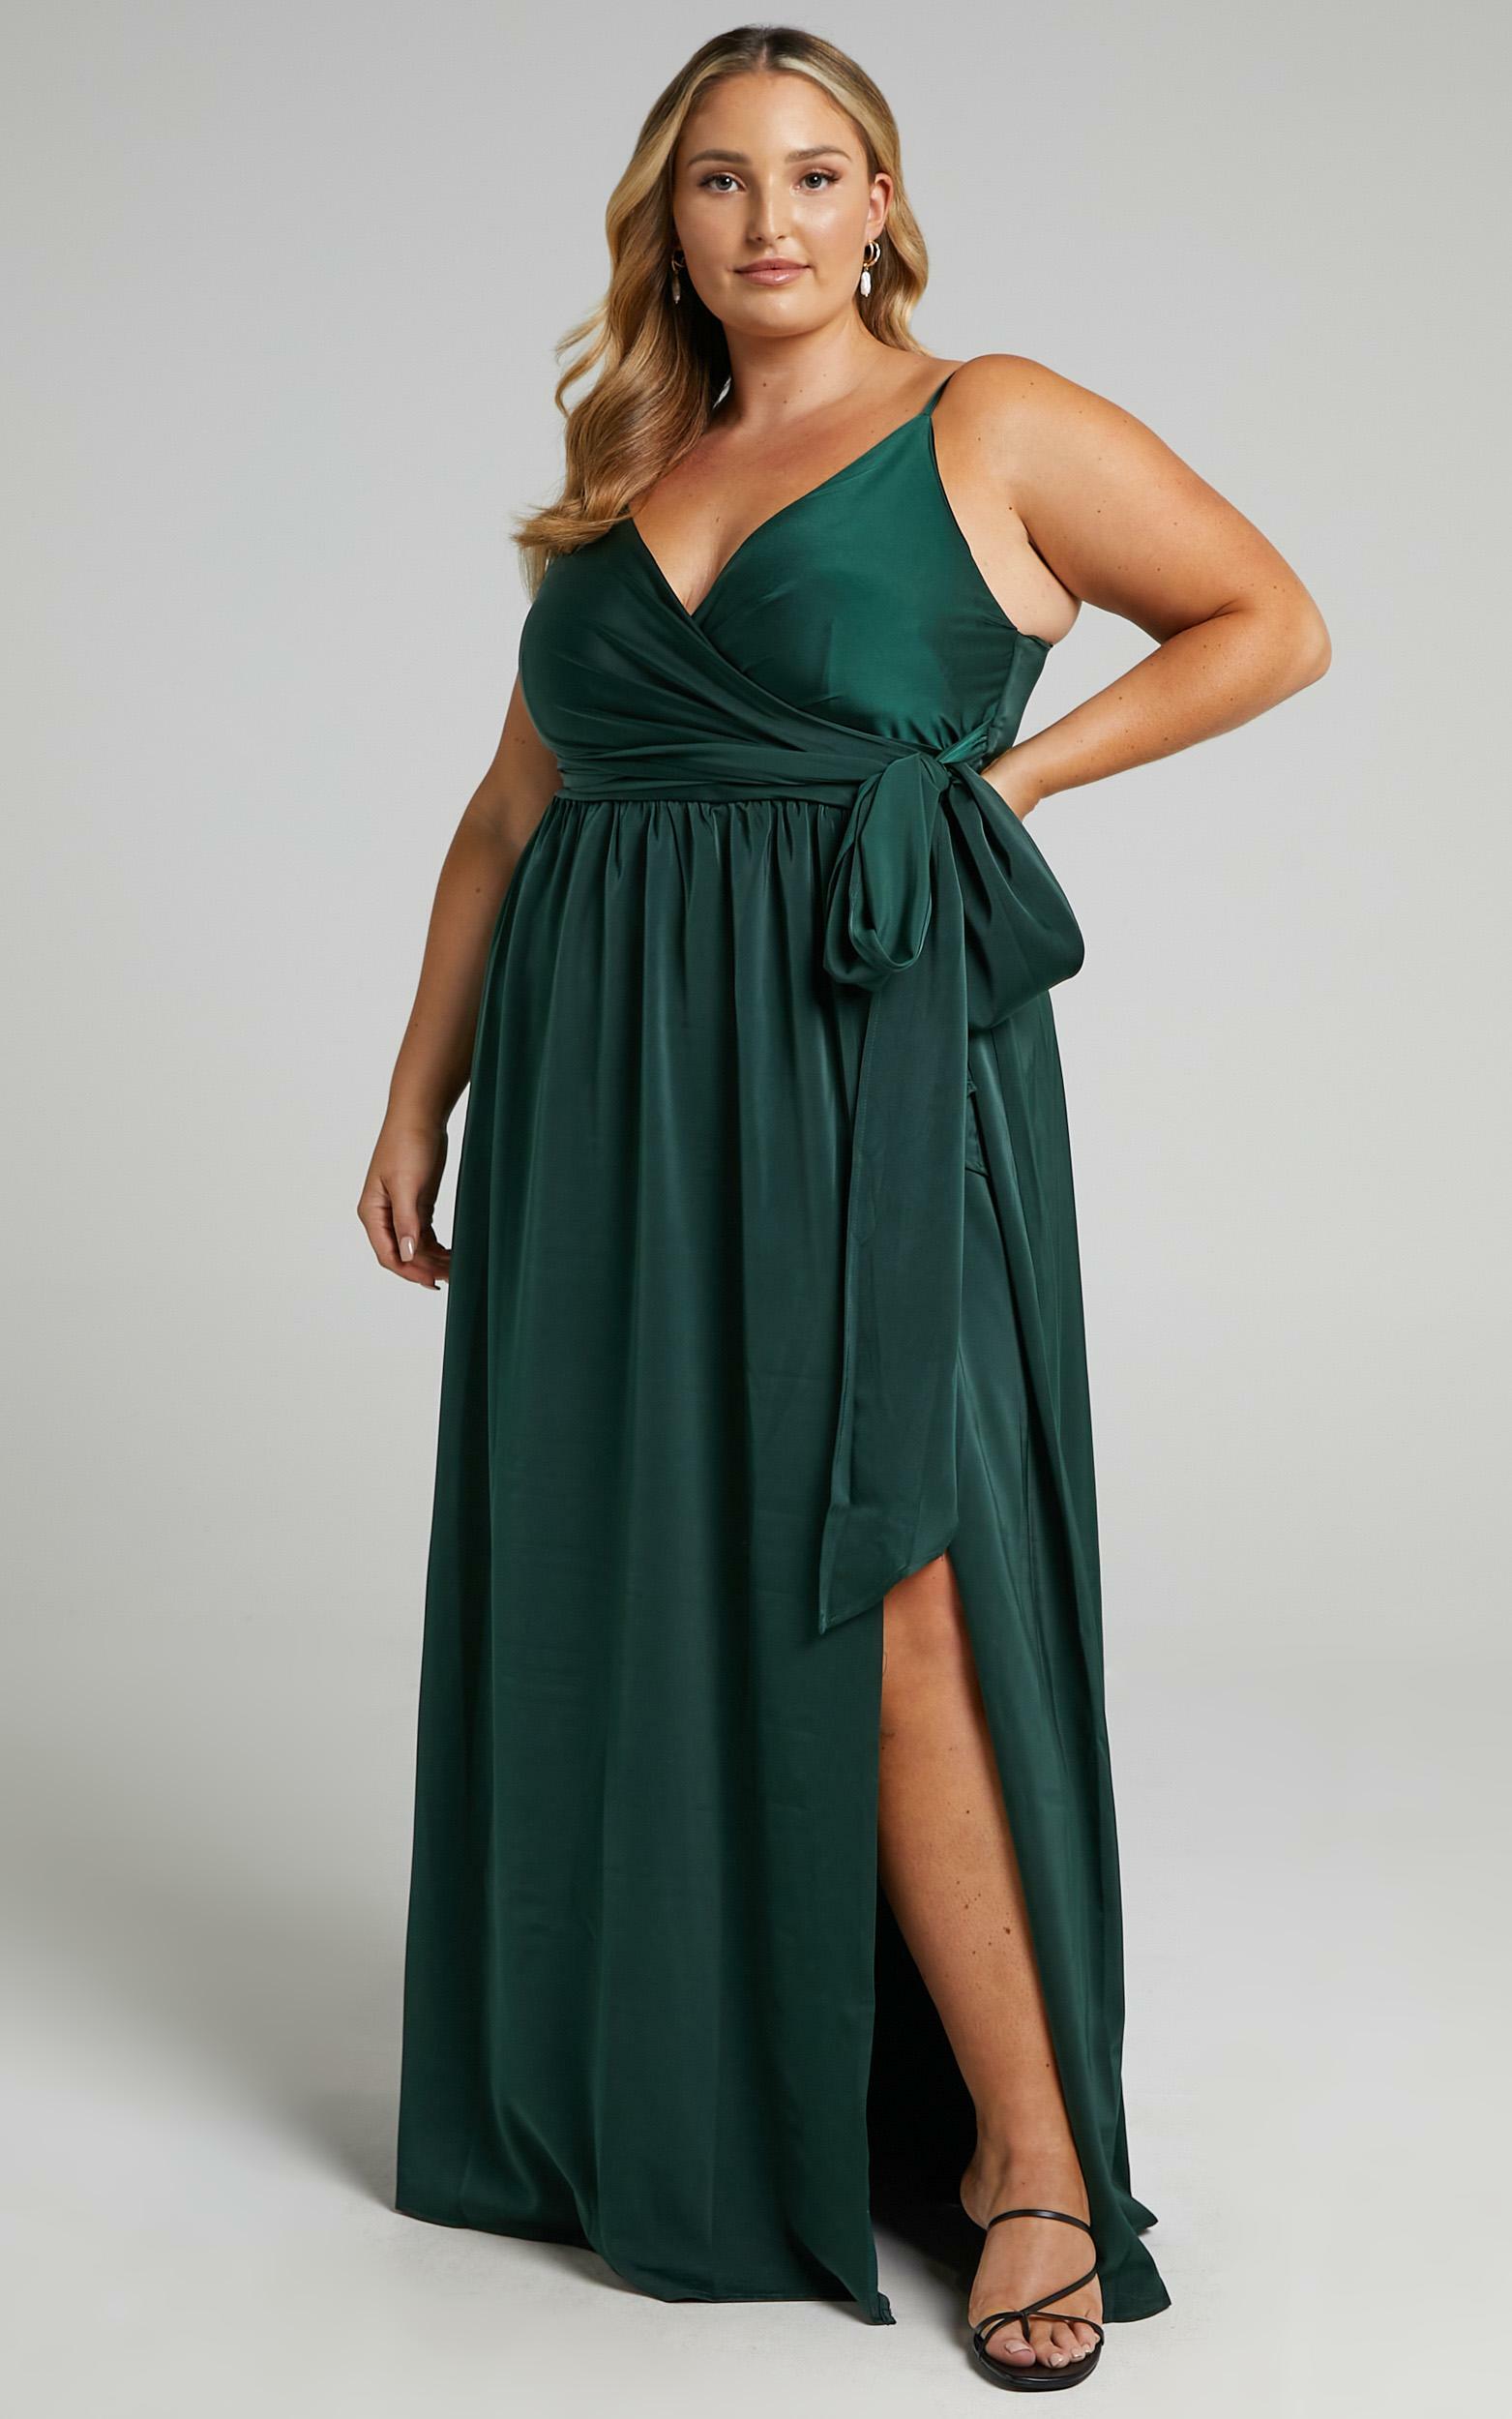 Revolve Around Me Dress in Emerald - 12, GRN1, hi-res image number null